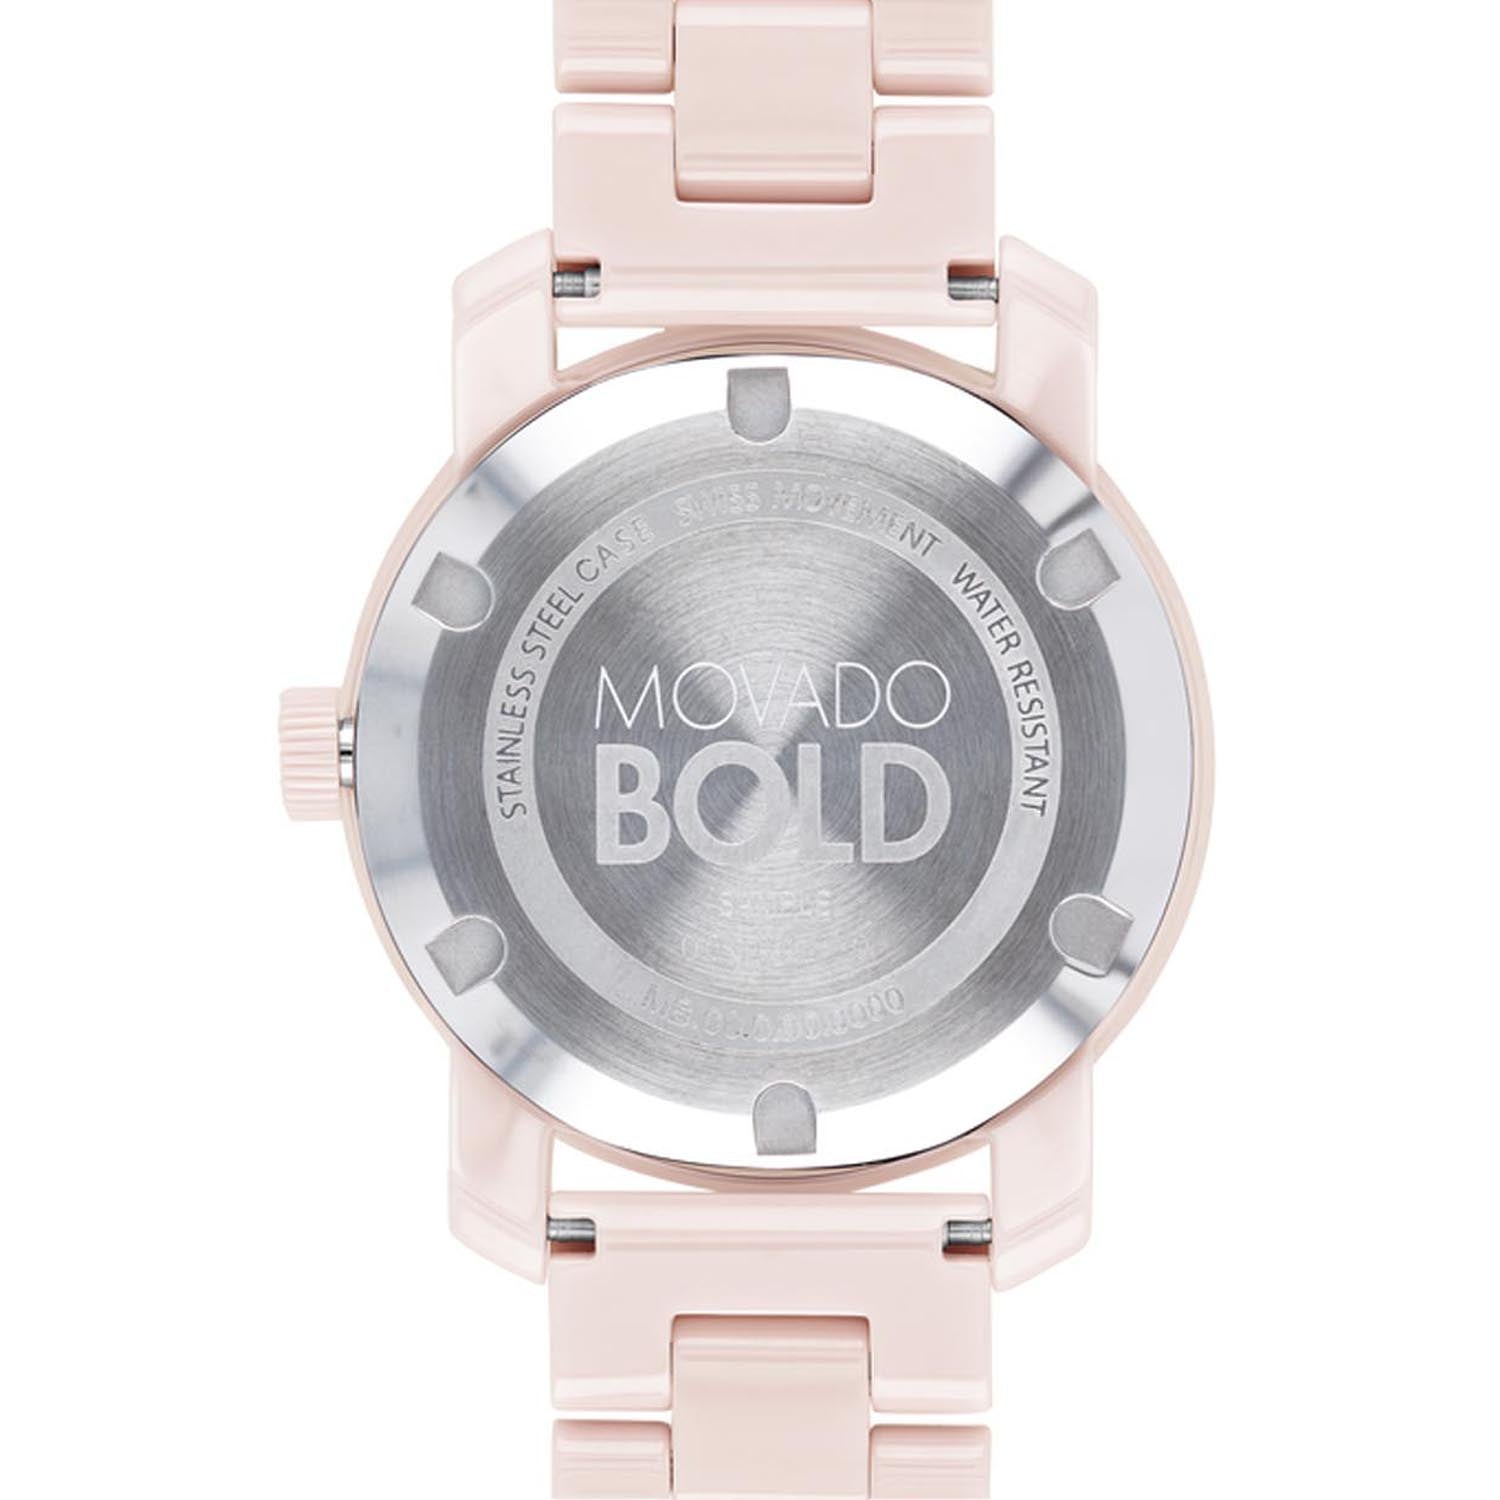 Movado Bold Womens Watch with Pink Dial and Pink Ceramic Bracelet (Swiss quartz movement)